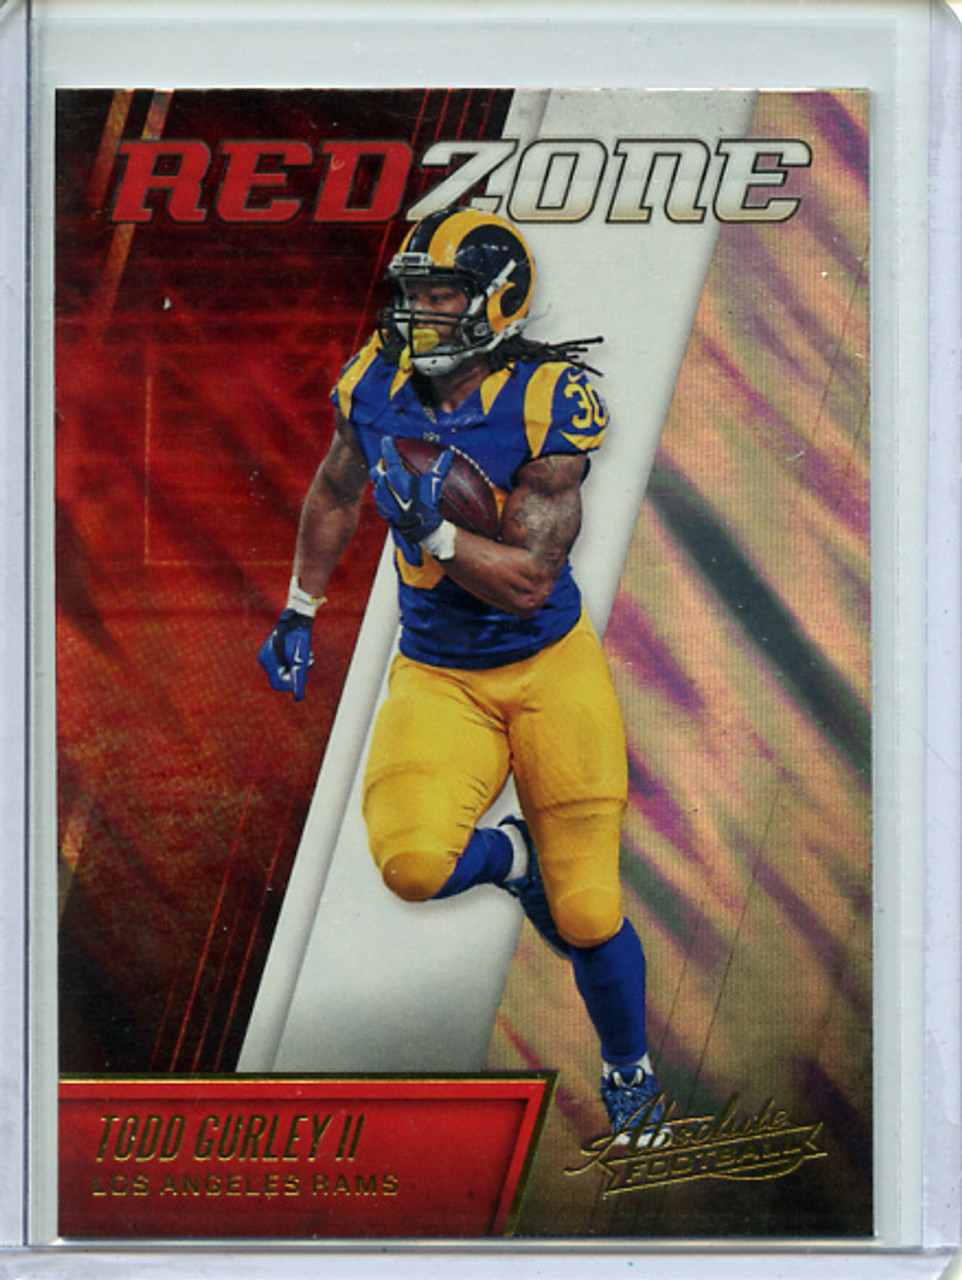 Todd Gurley 2016 Absolute, Red Zone #23